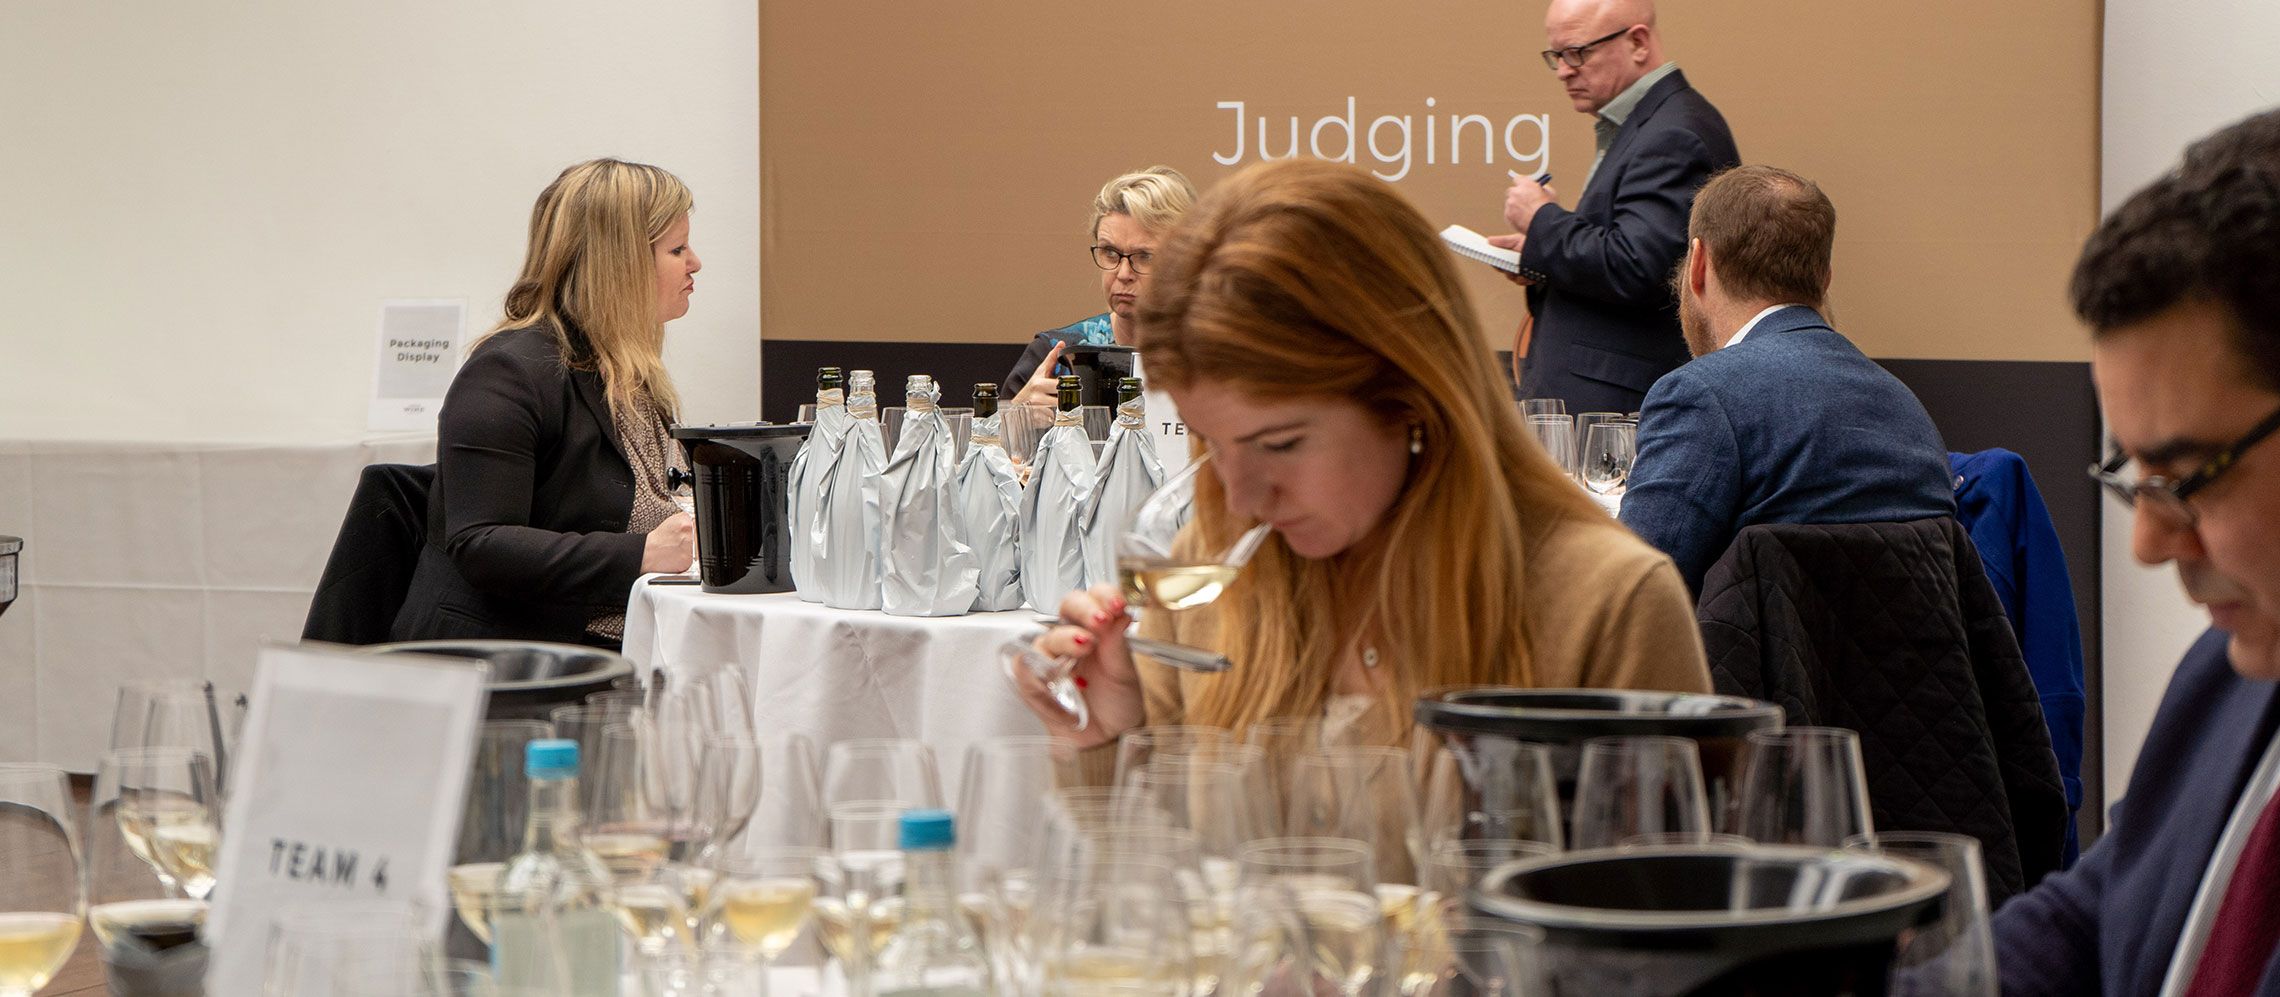 Photo for: 2020 London Wine Competition Winners Announced